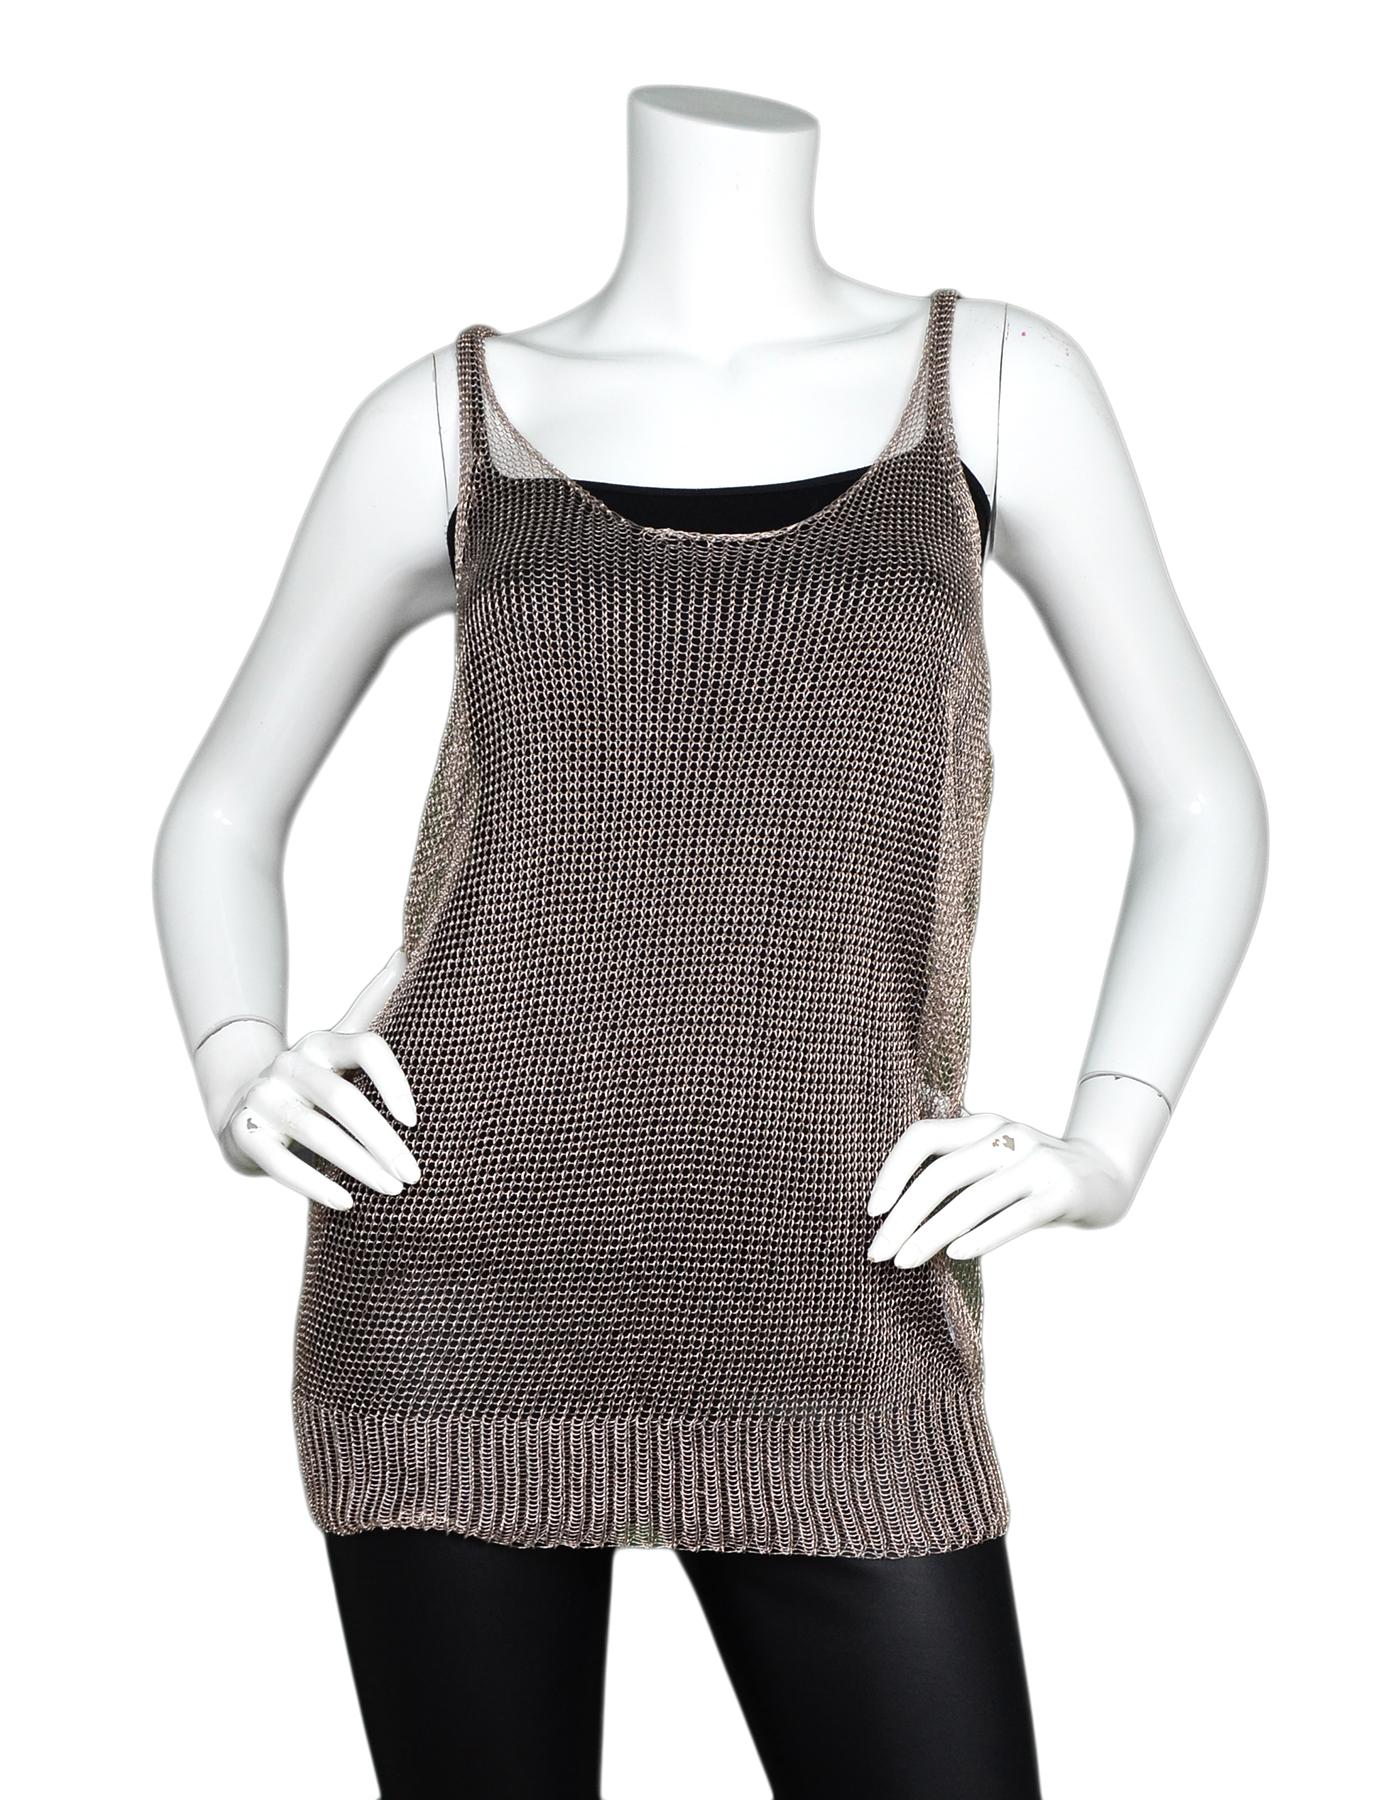 Lanvin Platinum Metallic Haut Maille Open Knit Mesh Tank Top NWT Sz XL

Made In: Italy
Color: Platinum
Materials: 63% viscose, 35% polyamide 
Lining: Unlined 
Opening/Closure: Pull over
Overall Condition: New with original tags attached
Includes: 